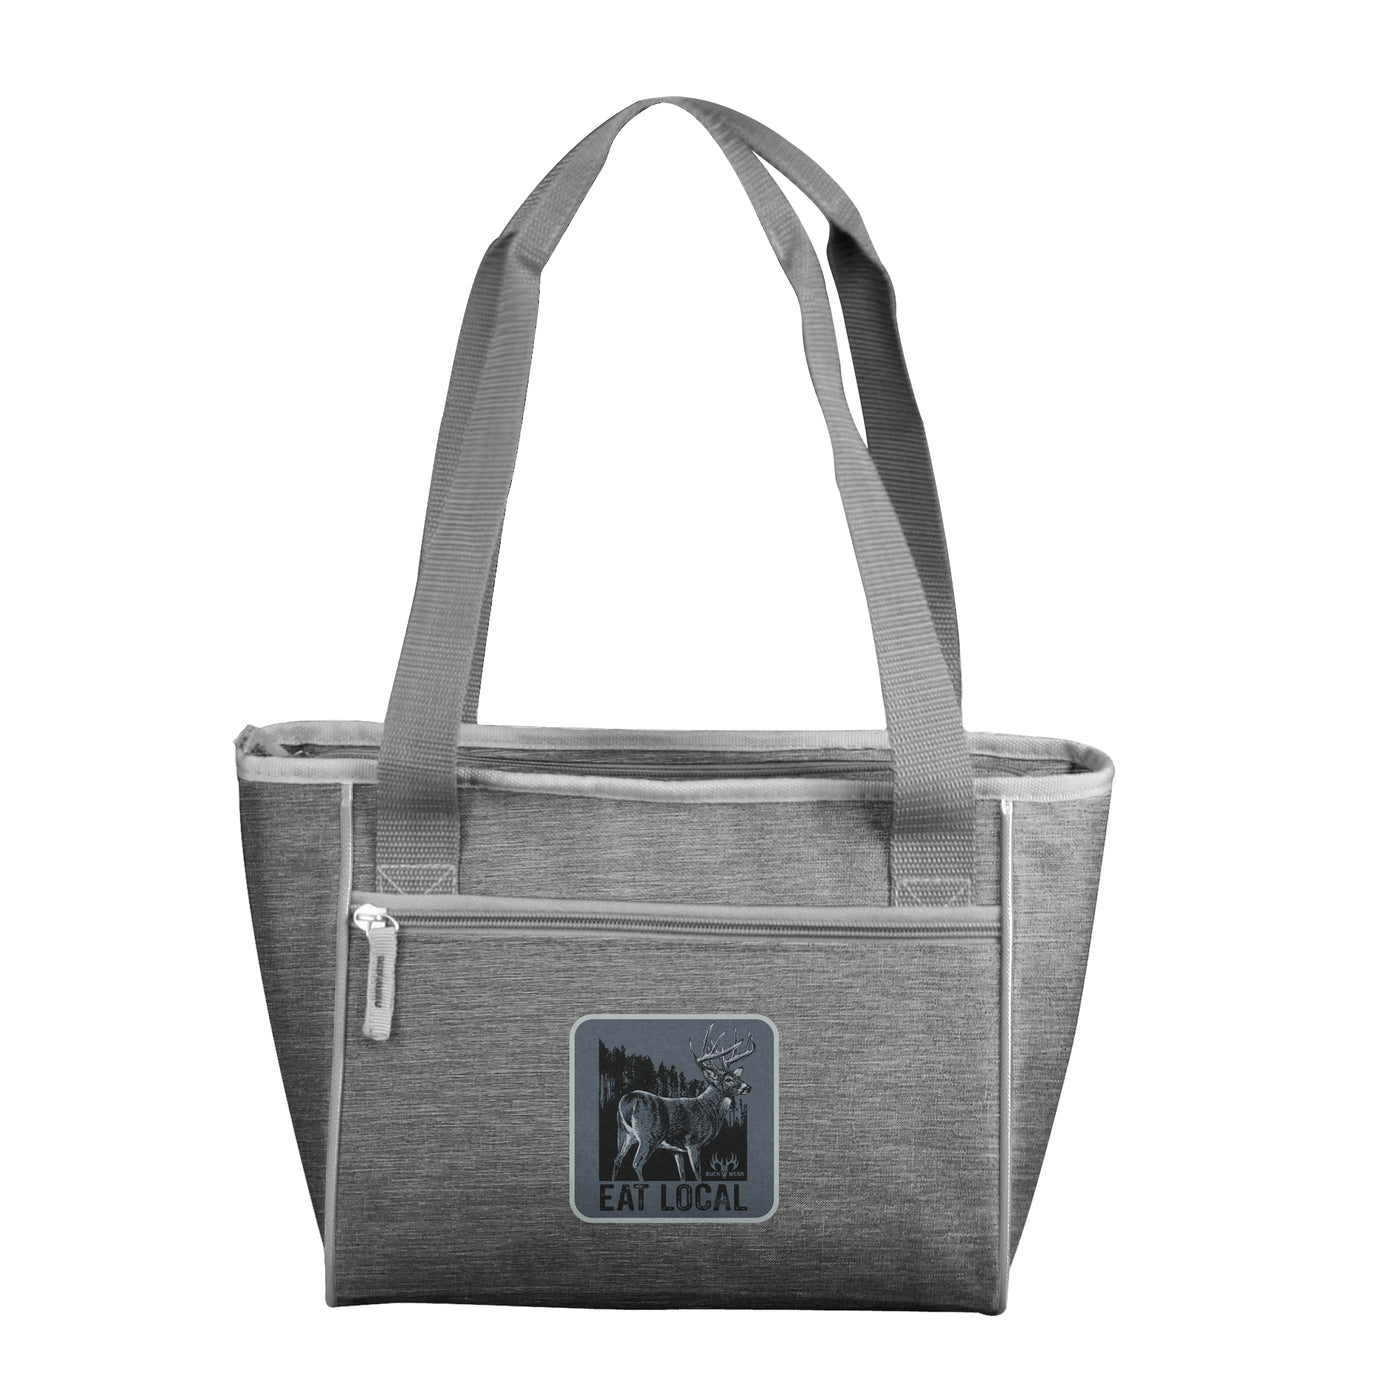 Eat Local 16 Can Cooler Tote